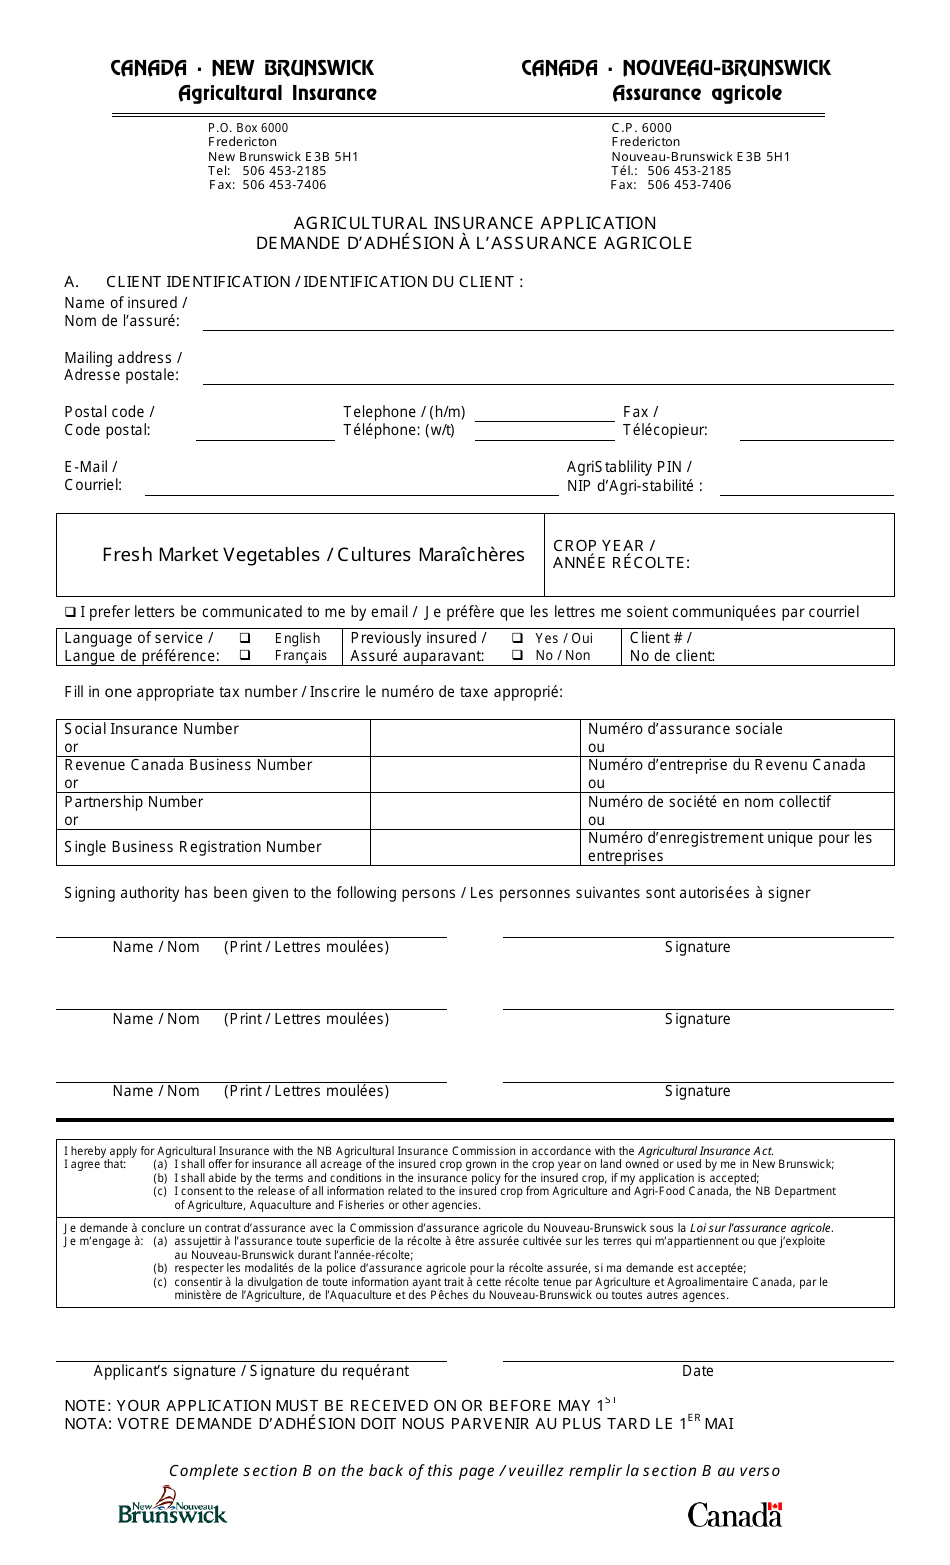 Agricultural Insurance Application - Fresh Market Vegetables - New Brunswick, Canada (English / French), Page 1